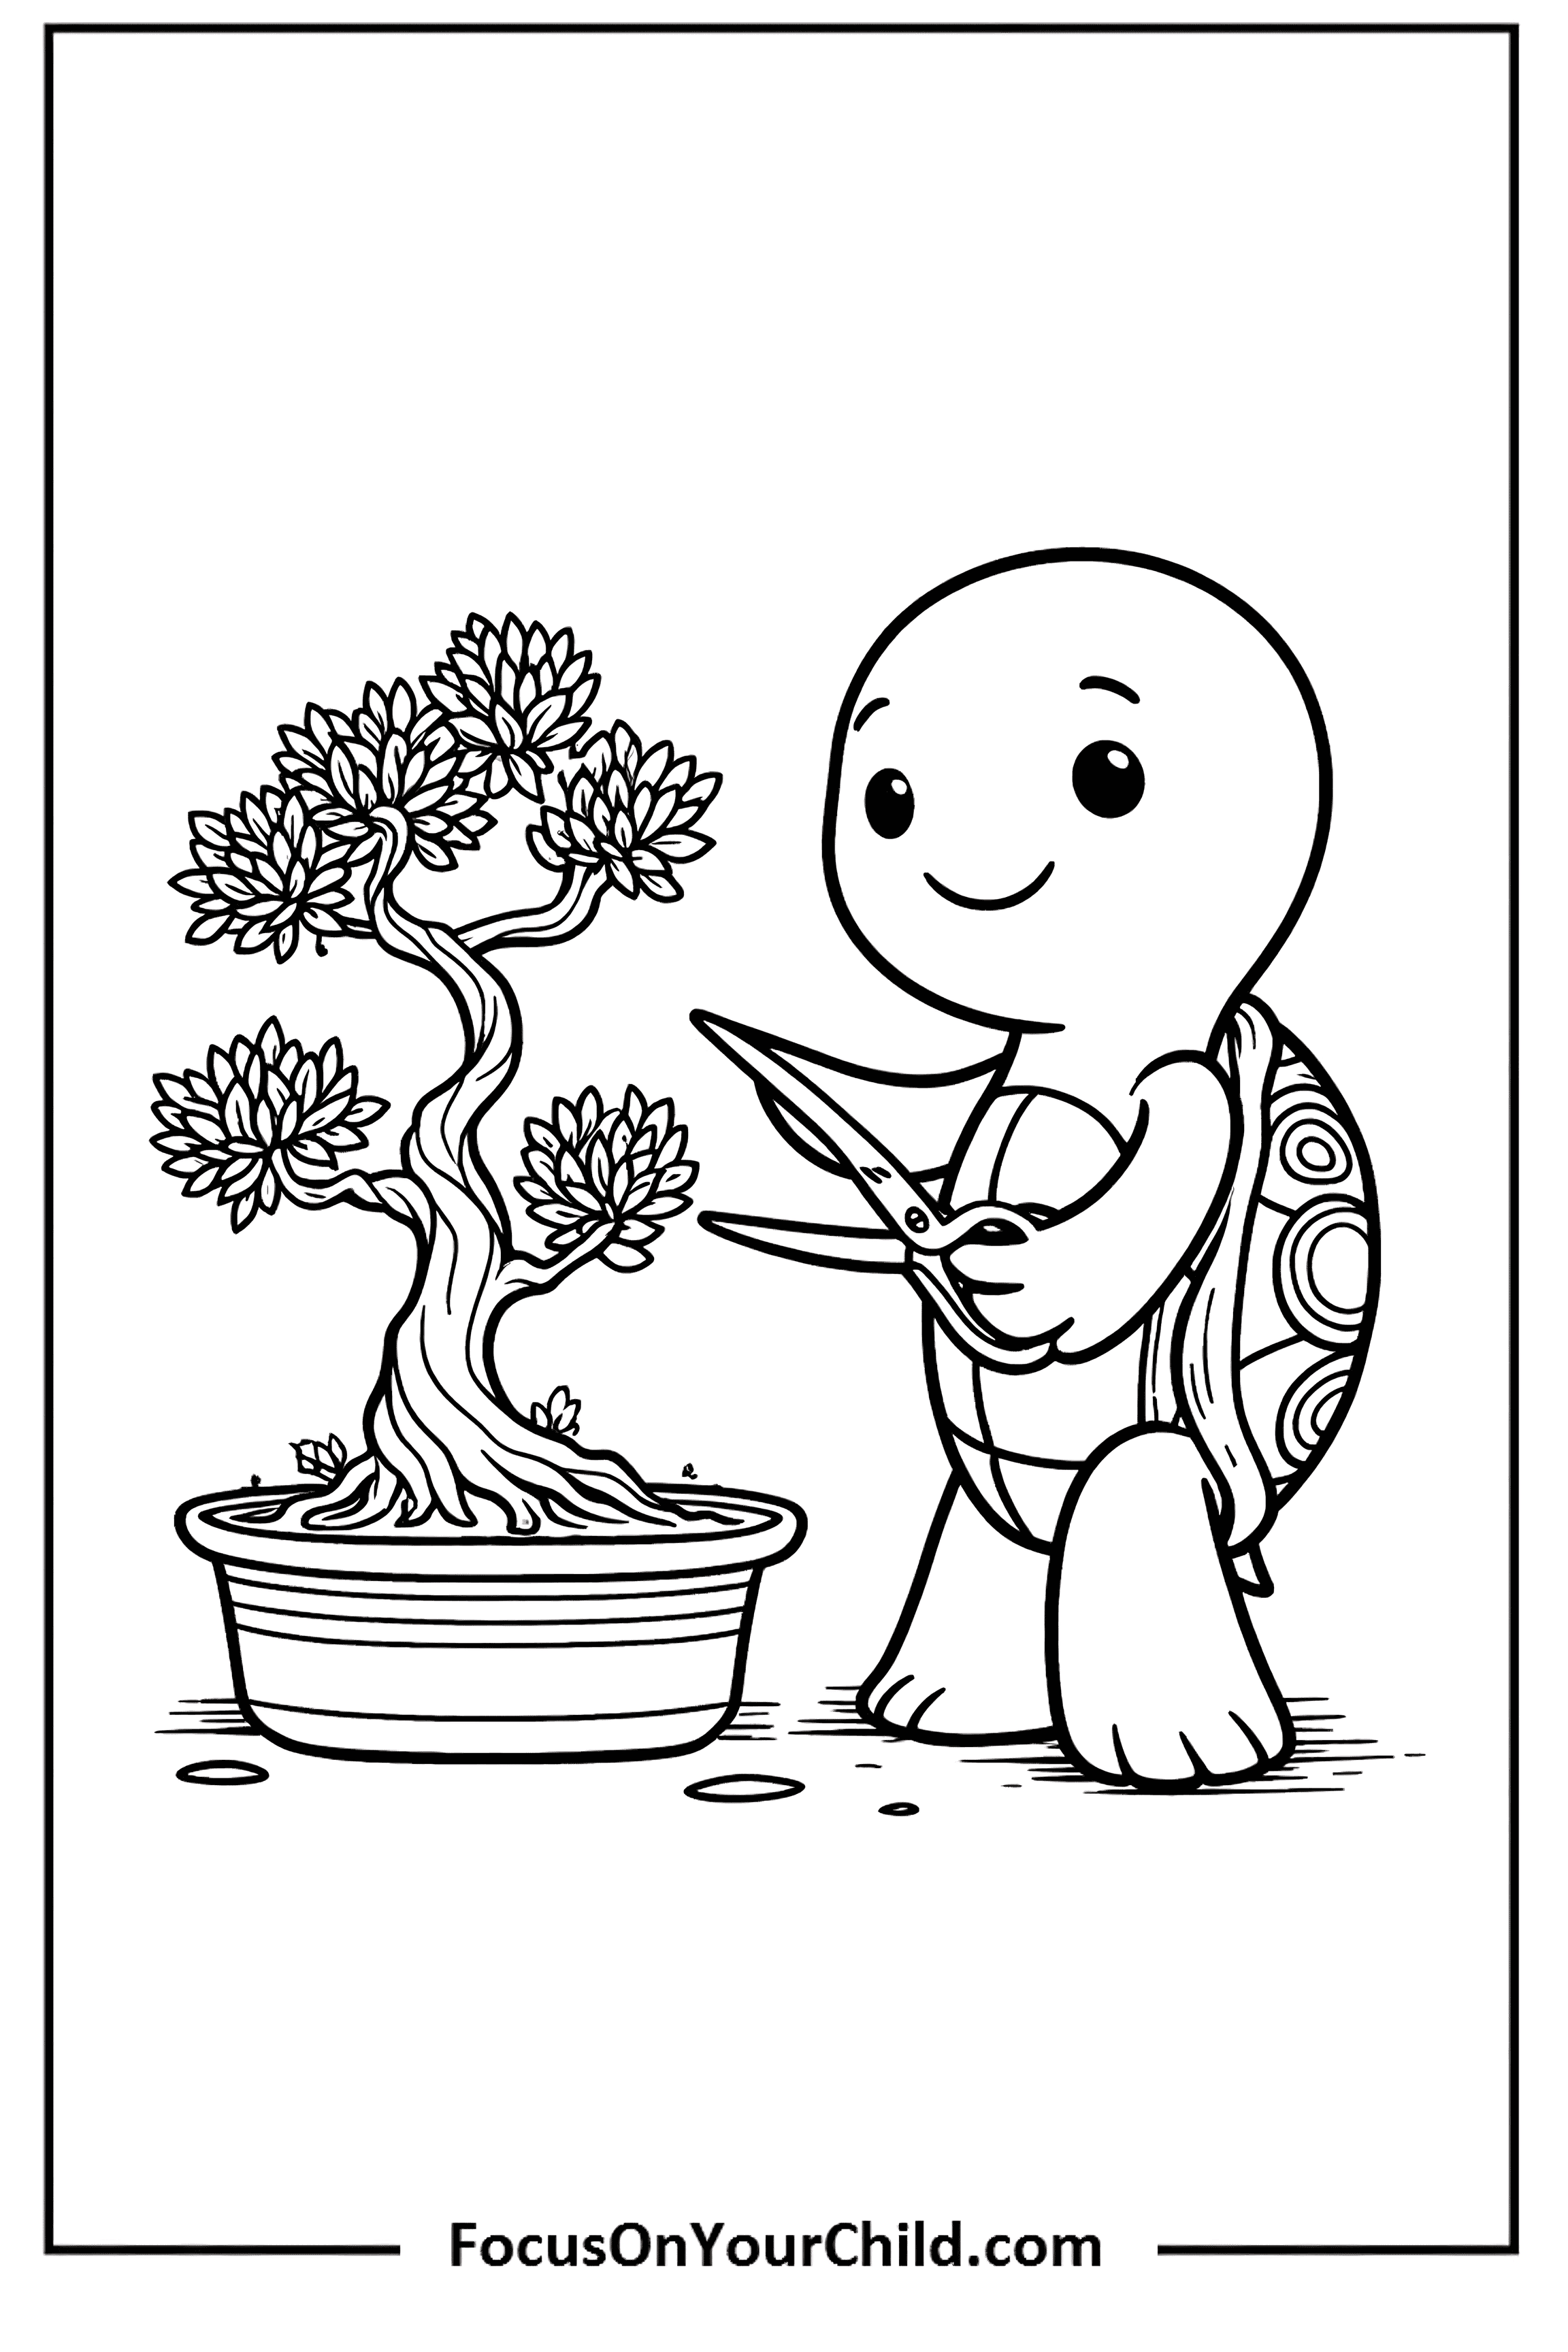 Adorable turtle pruning bonsai tree in charming black-and-white line drawing.